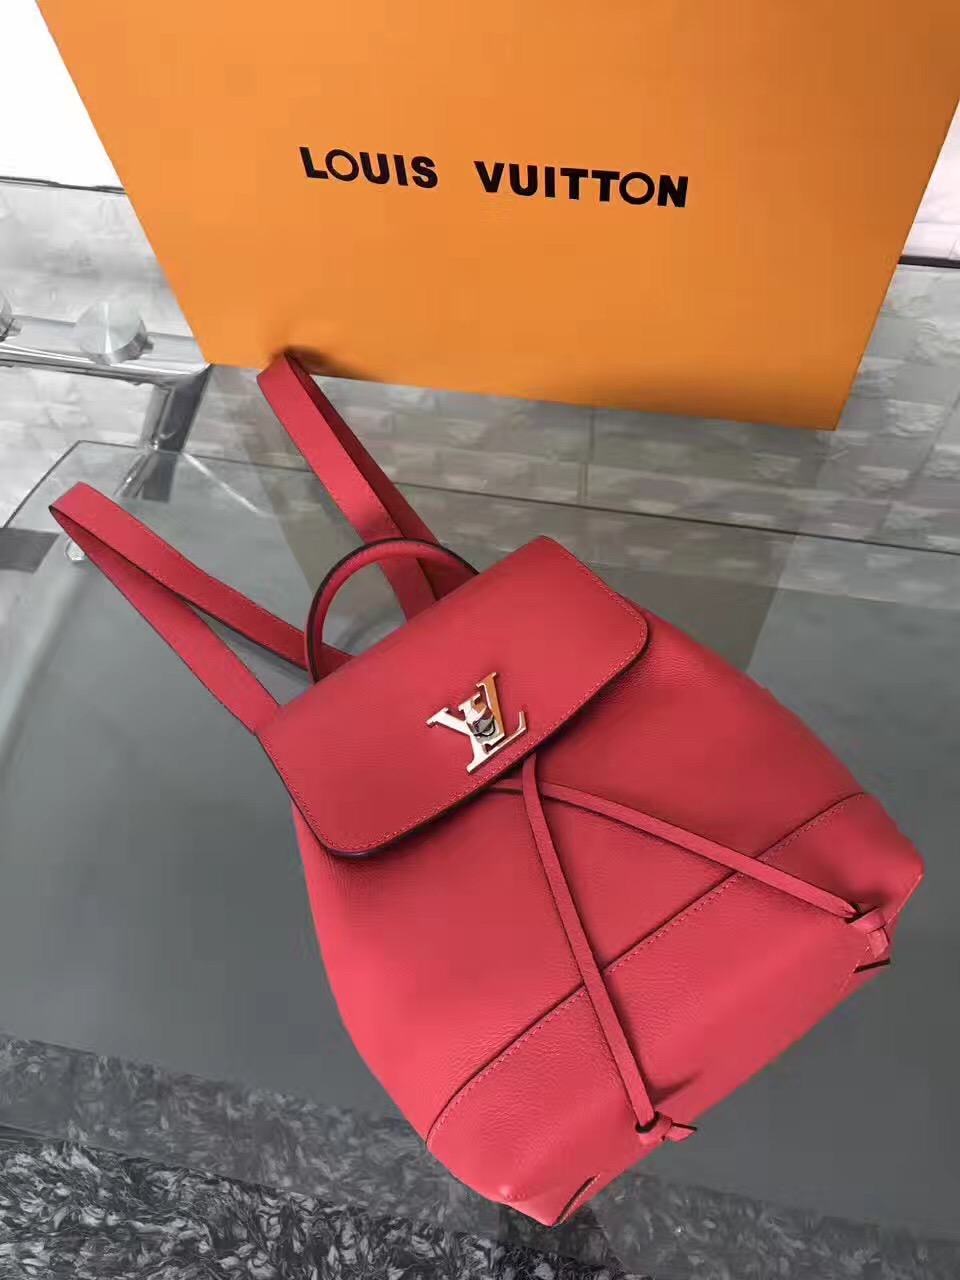 LV Louis Vuitton backpack small leather red handbags